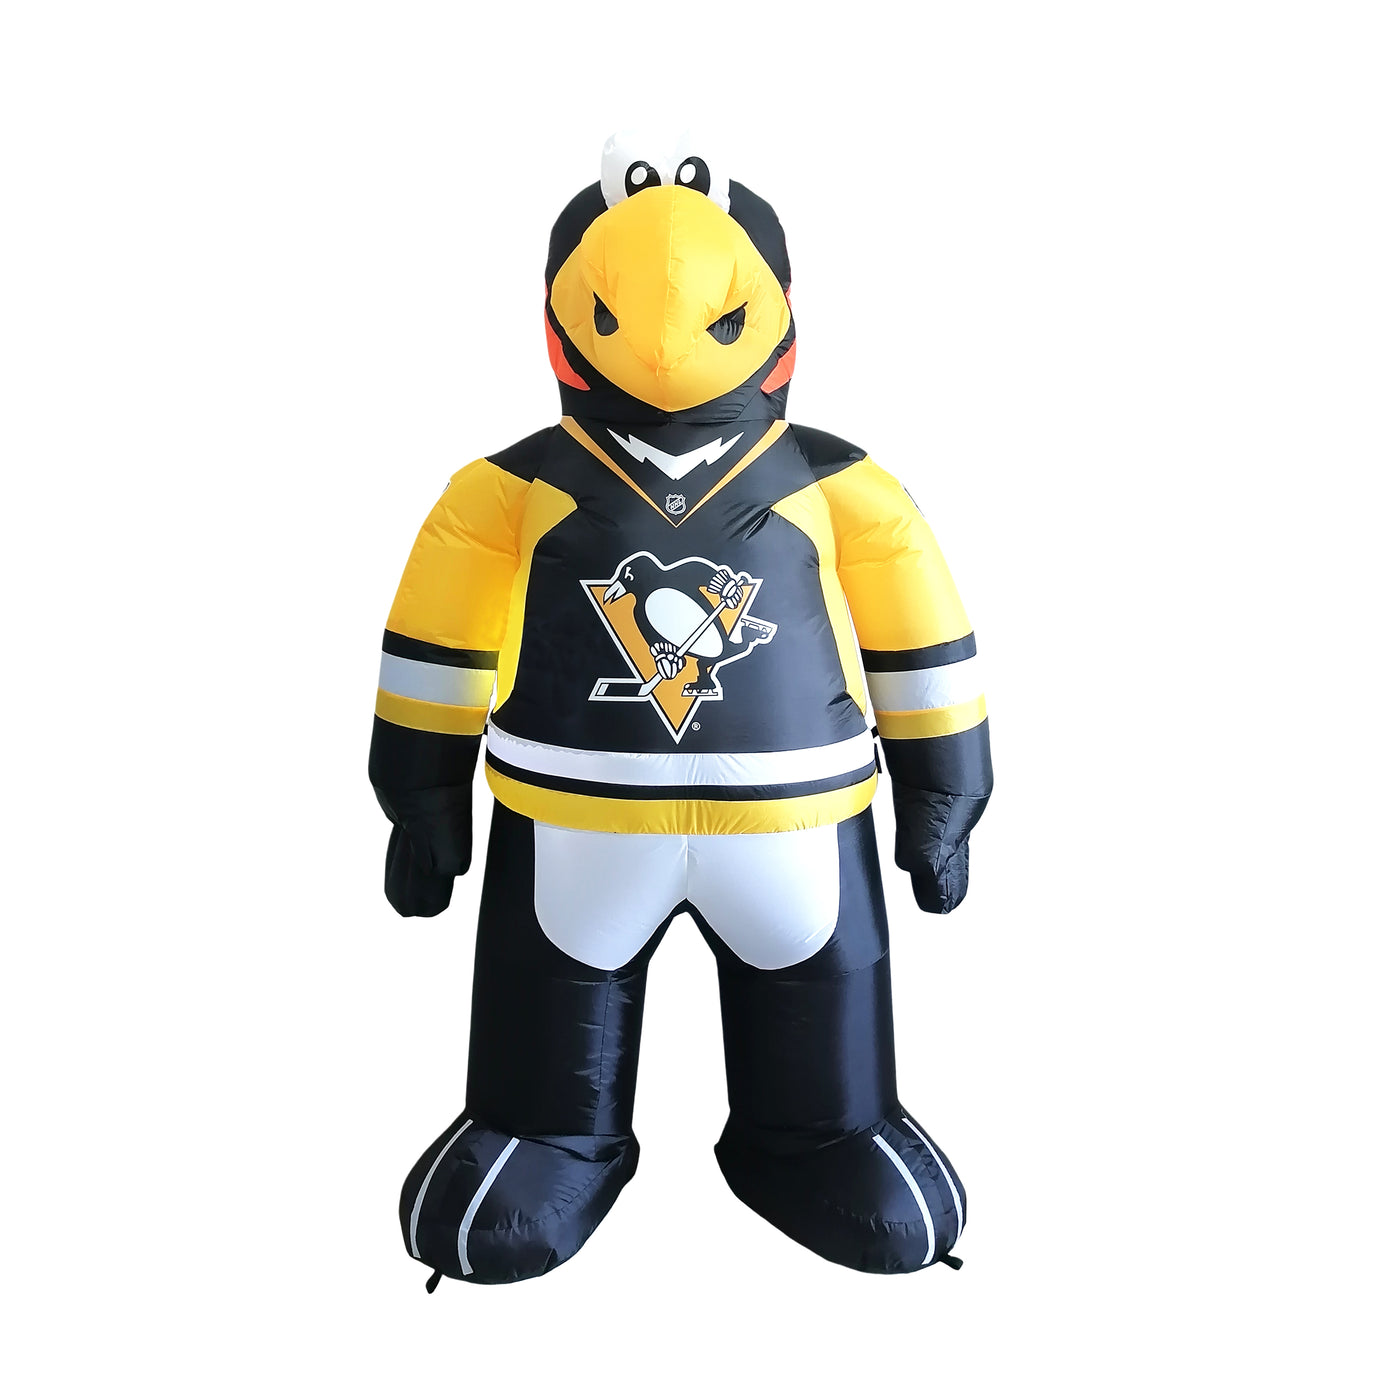 Pittsburgh Penguins Inflatable Mascot